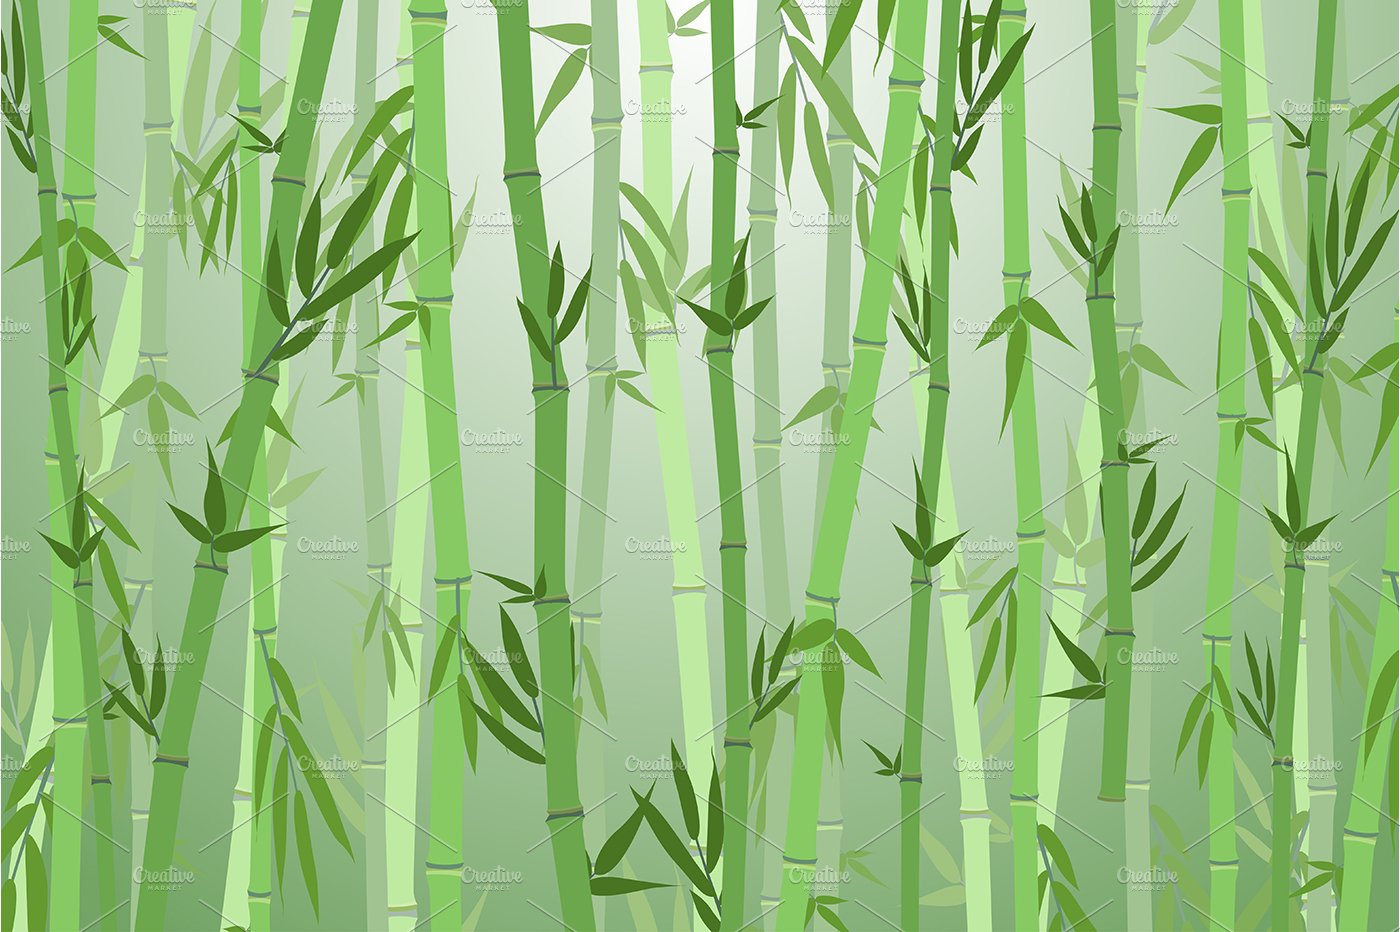 Bamboo Forest Landscape Background cover image.